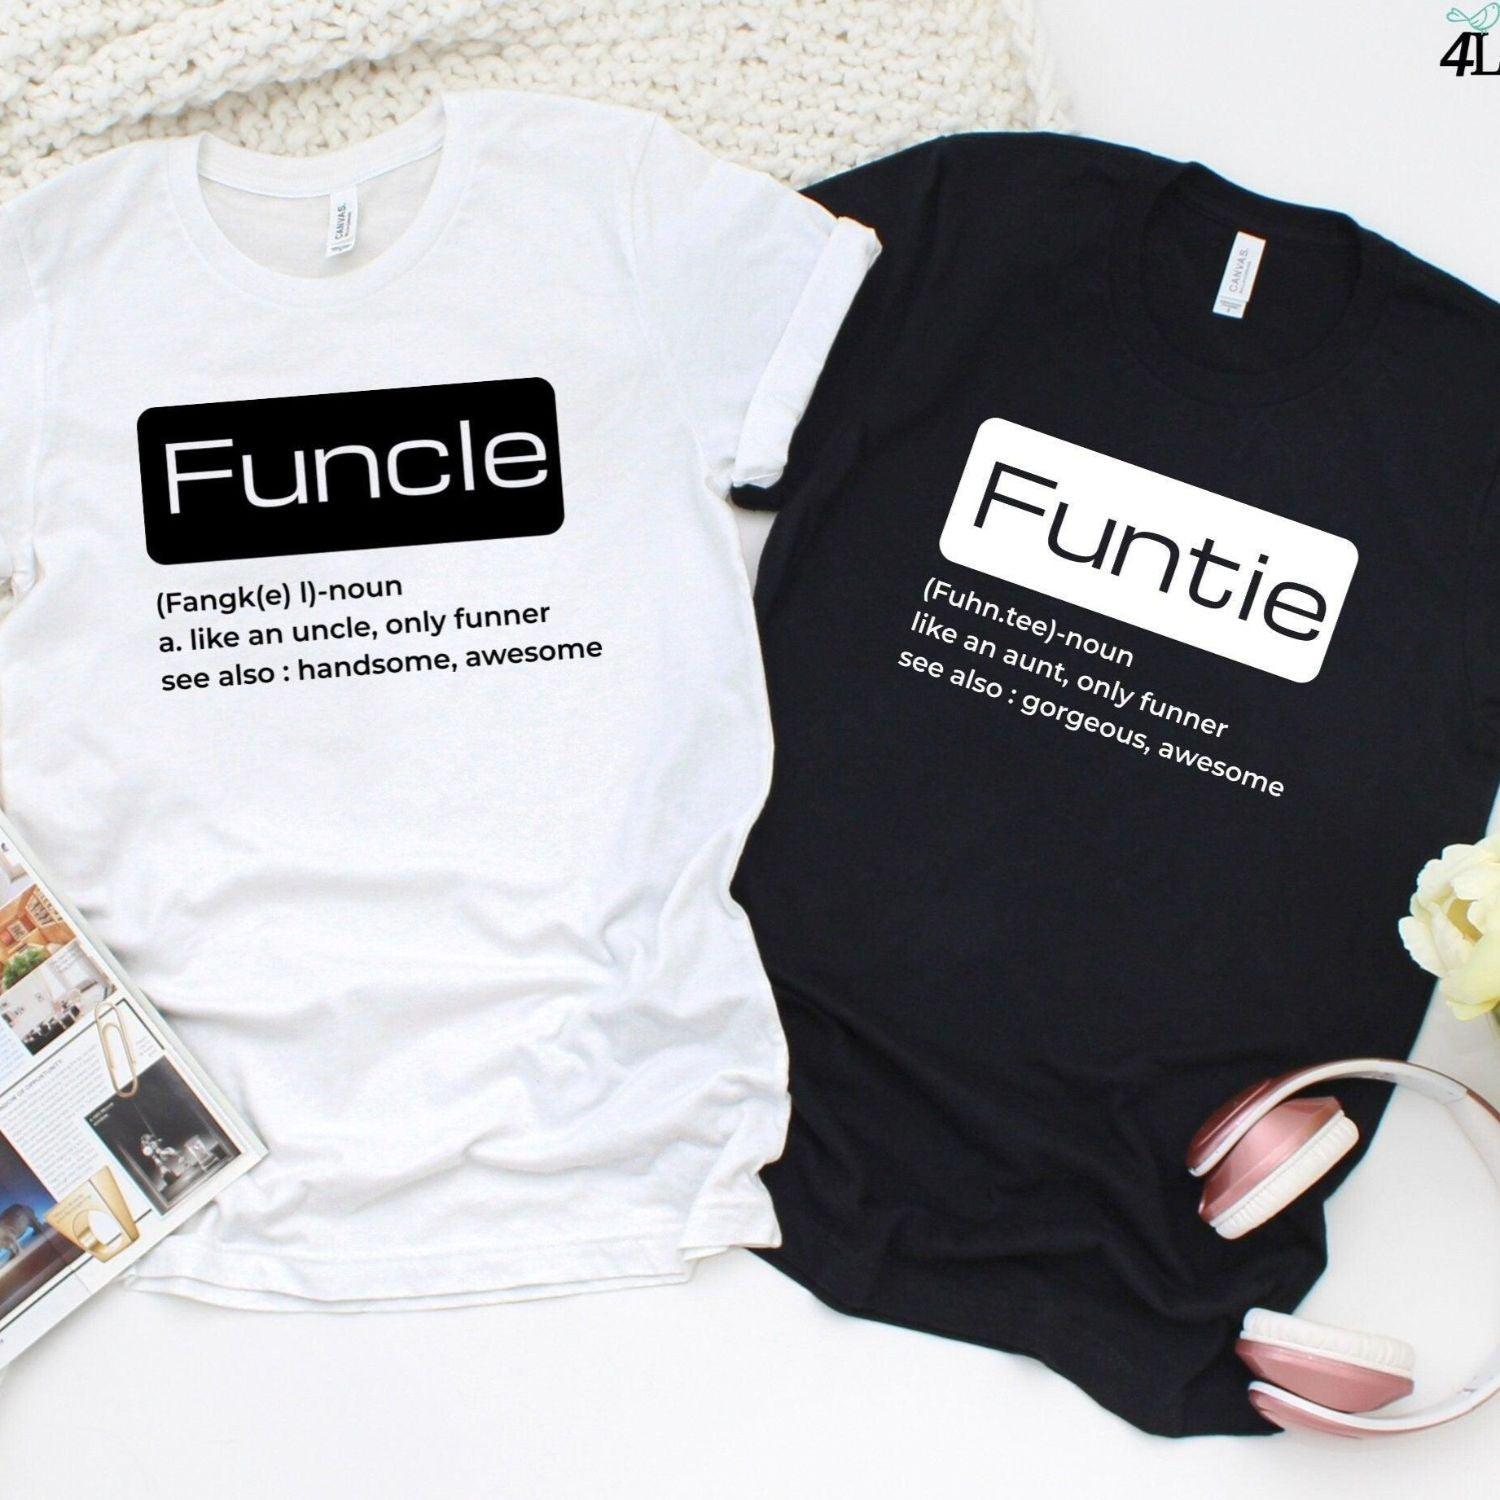 Humorous Family Matching Outfits: Amusing Uncle & Aunt Presents, Funcle & Funtie Defined Sets - 4Lovebirds